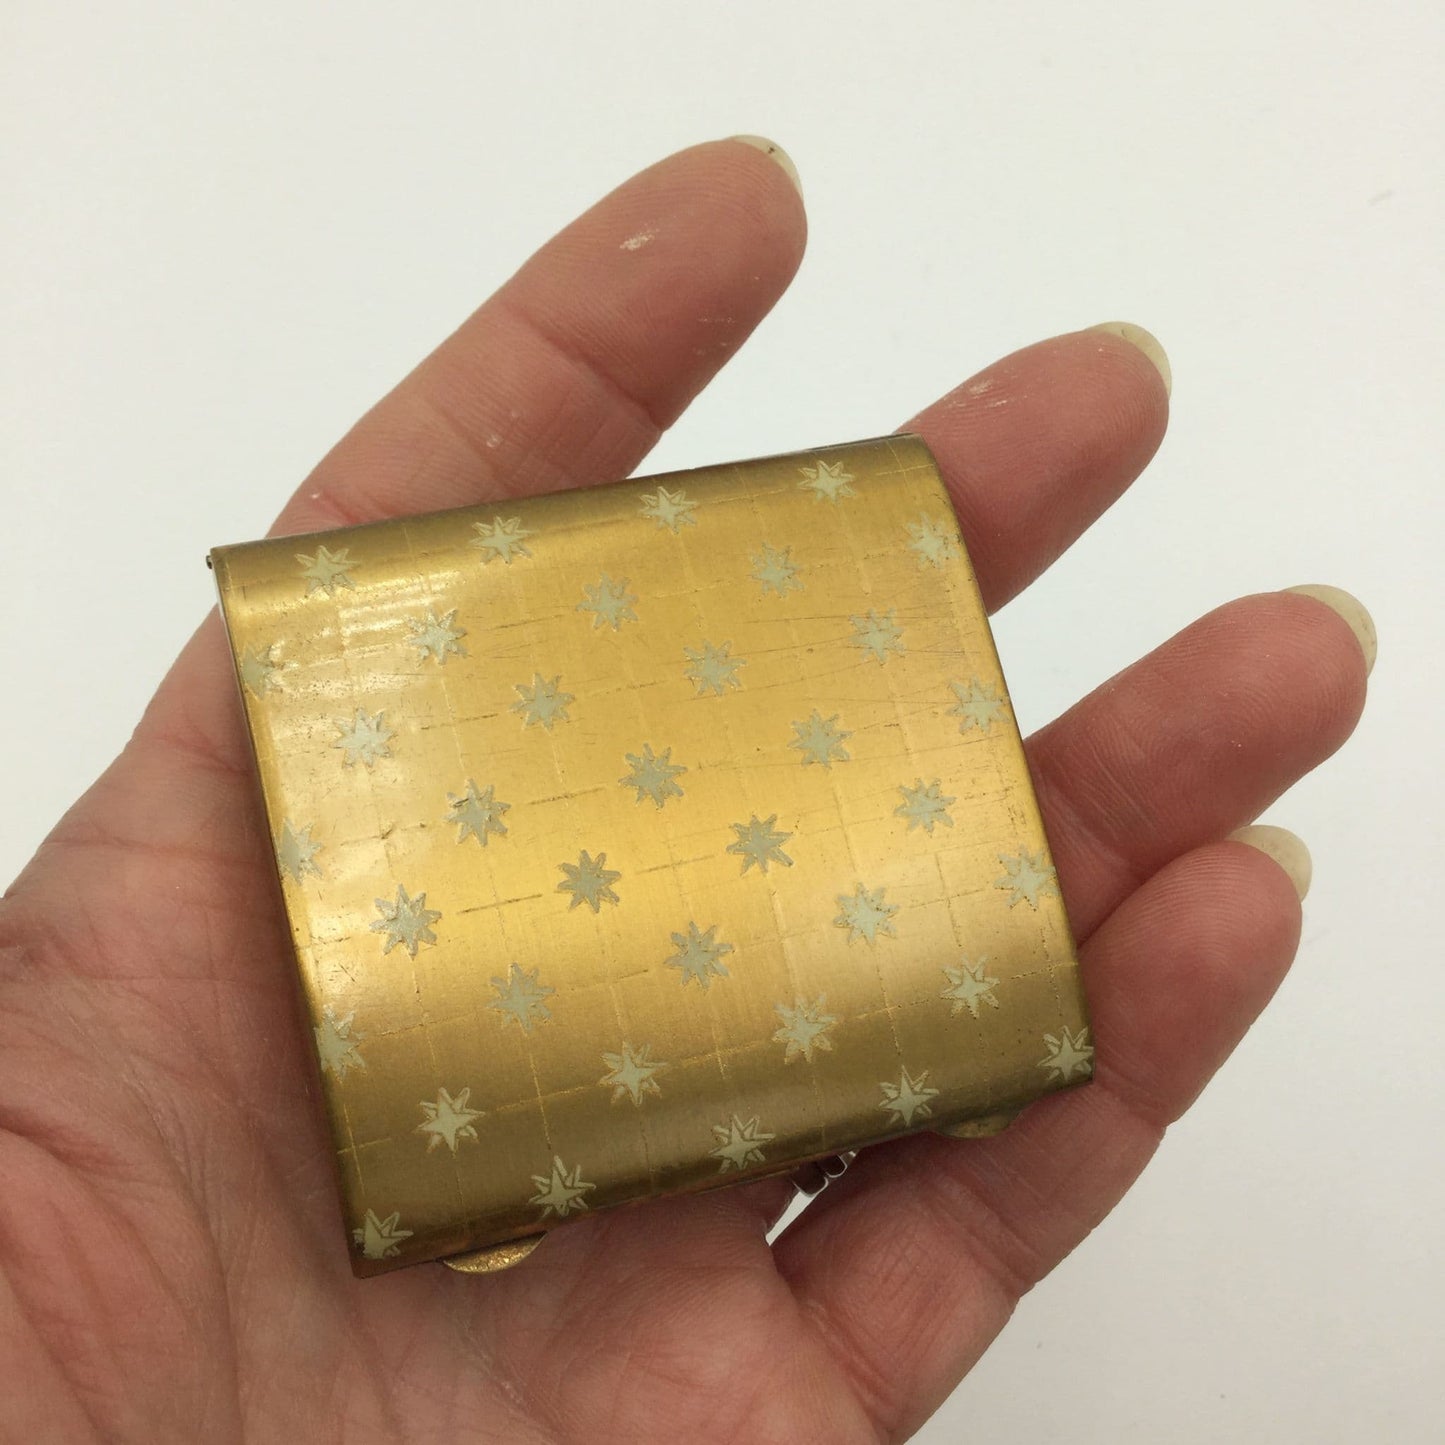 rectangular gold mirror compact in a hand